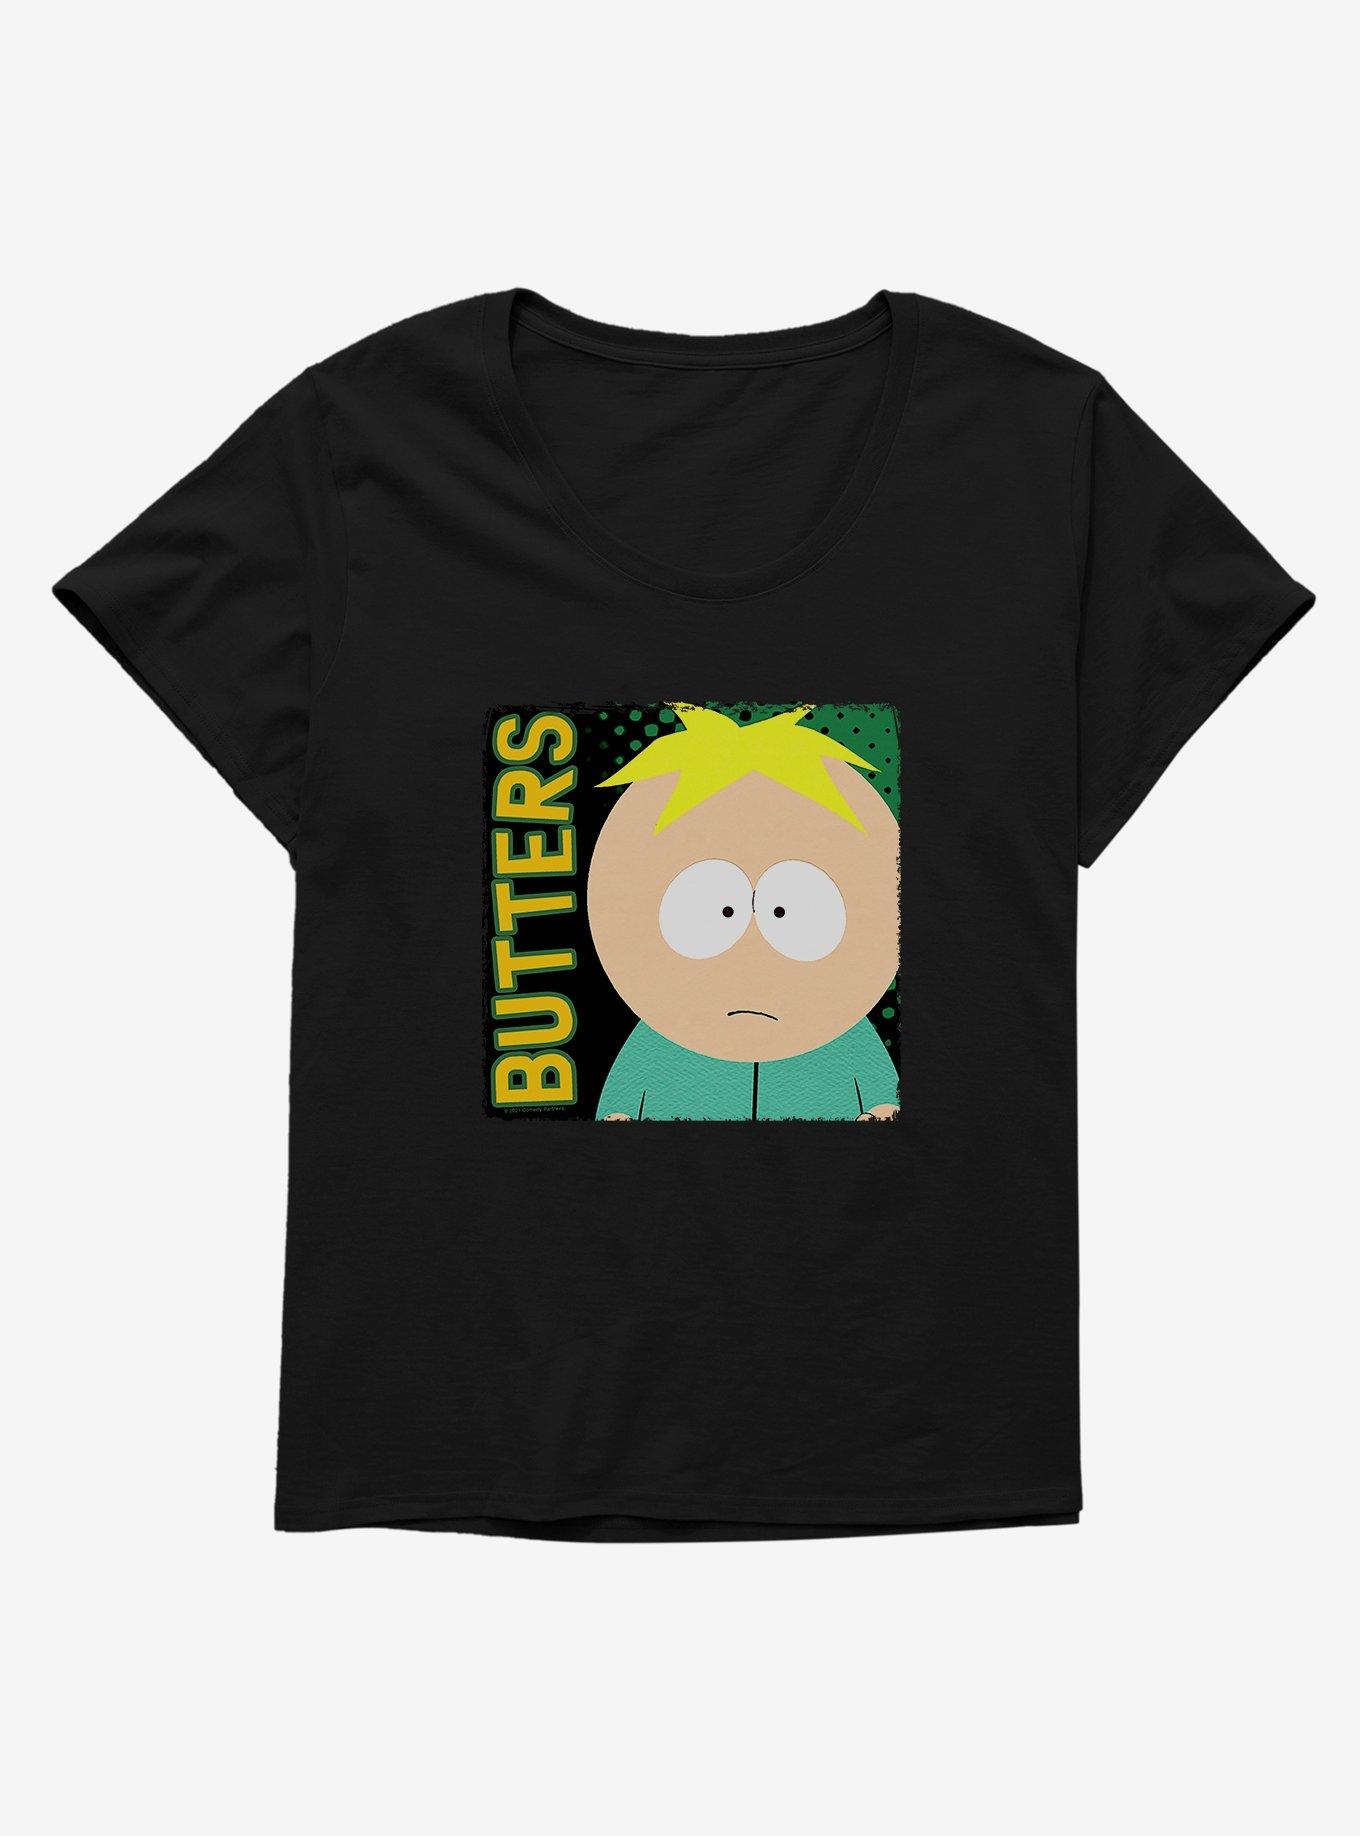 South Park Butters Intro Girls T-Shirt Plus